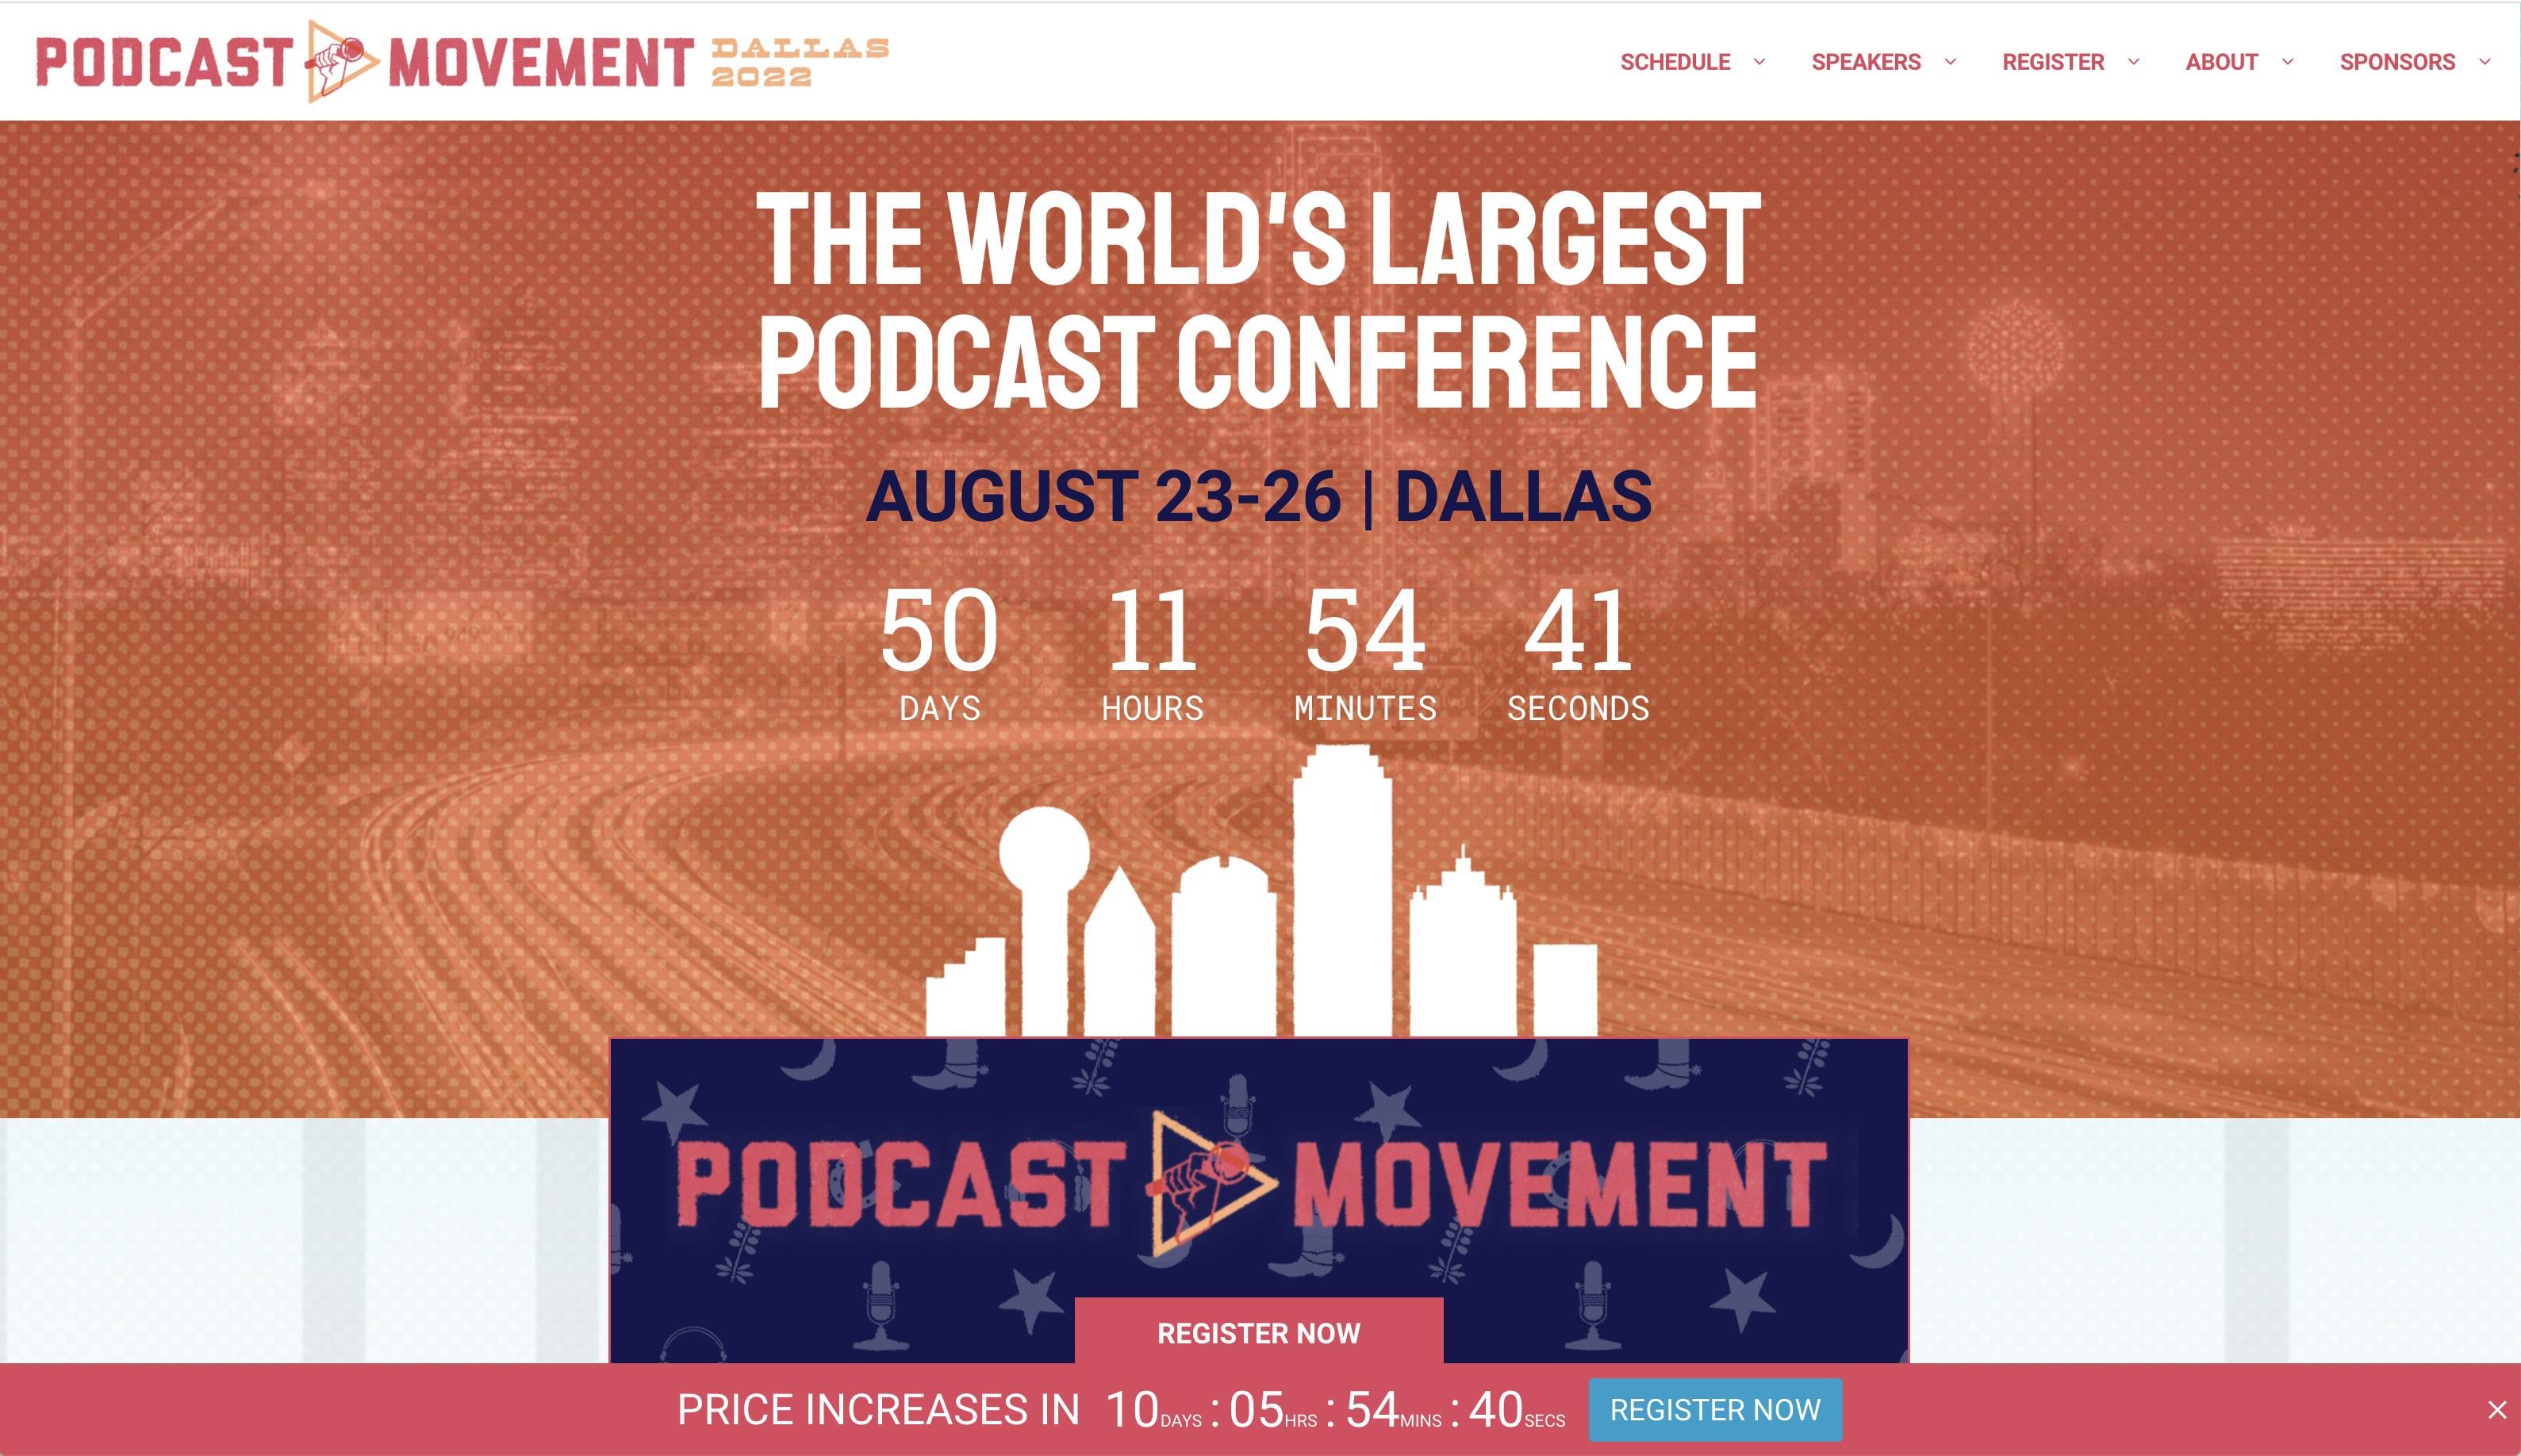 Podcast Movement homepage